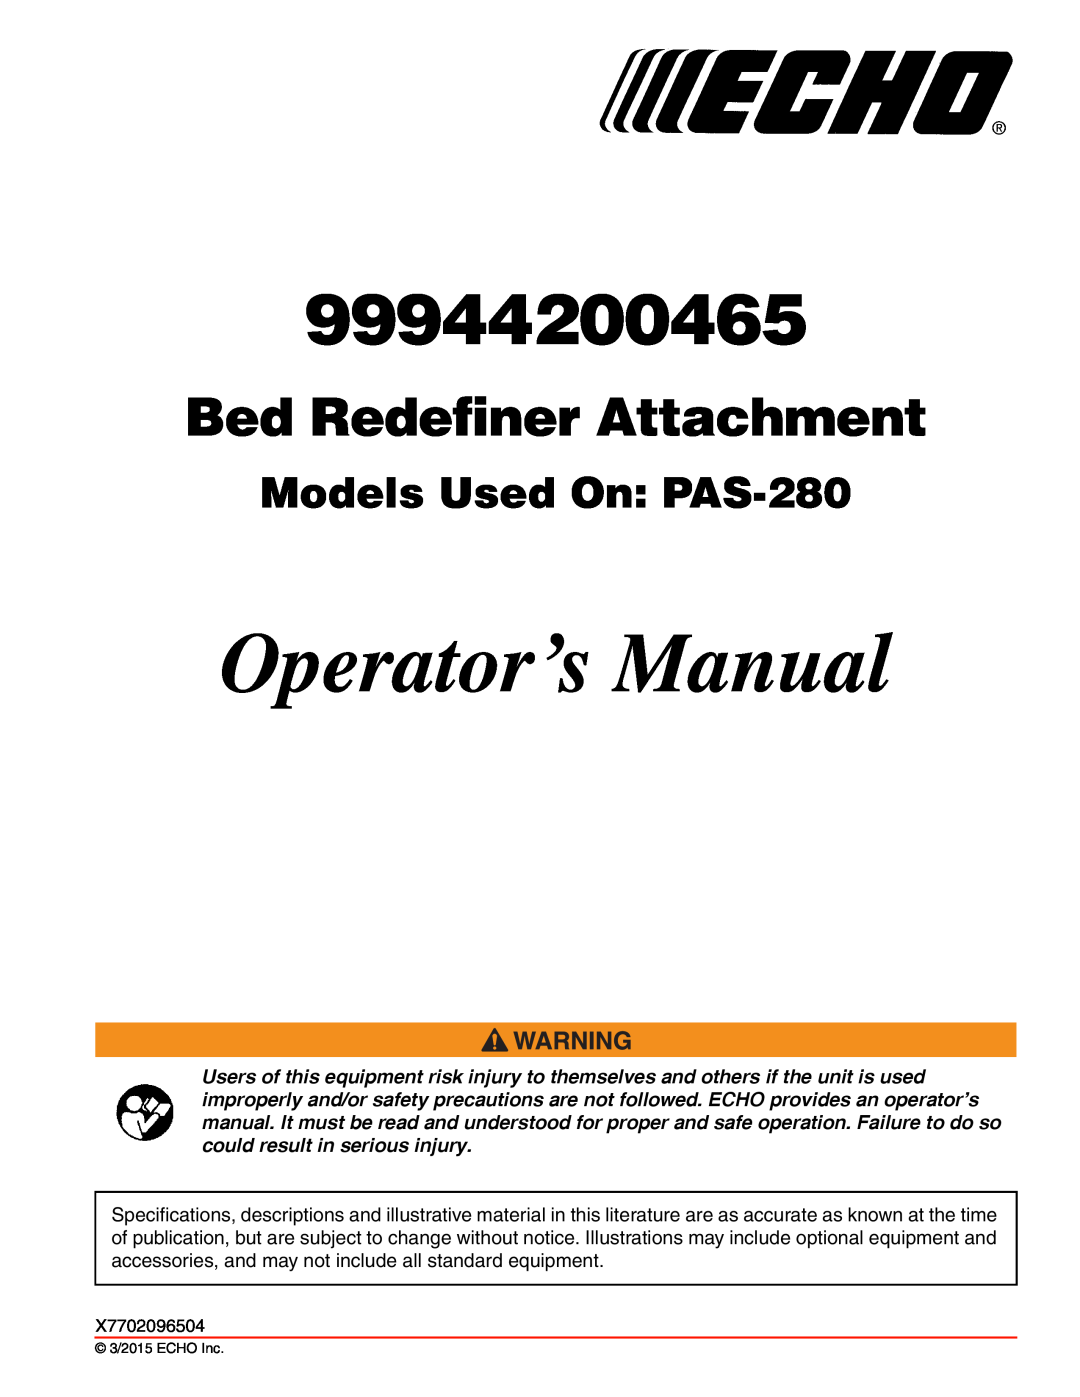 Echo 99944200465 specifications Operator’s Manual, Bed Redefiner Attachment, Models Used On: PAS-280 